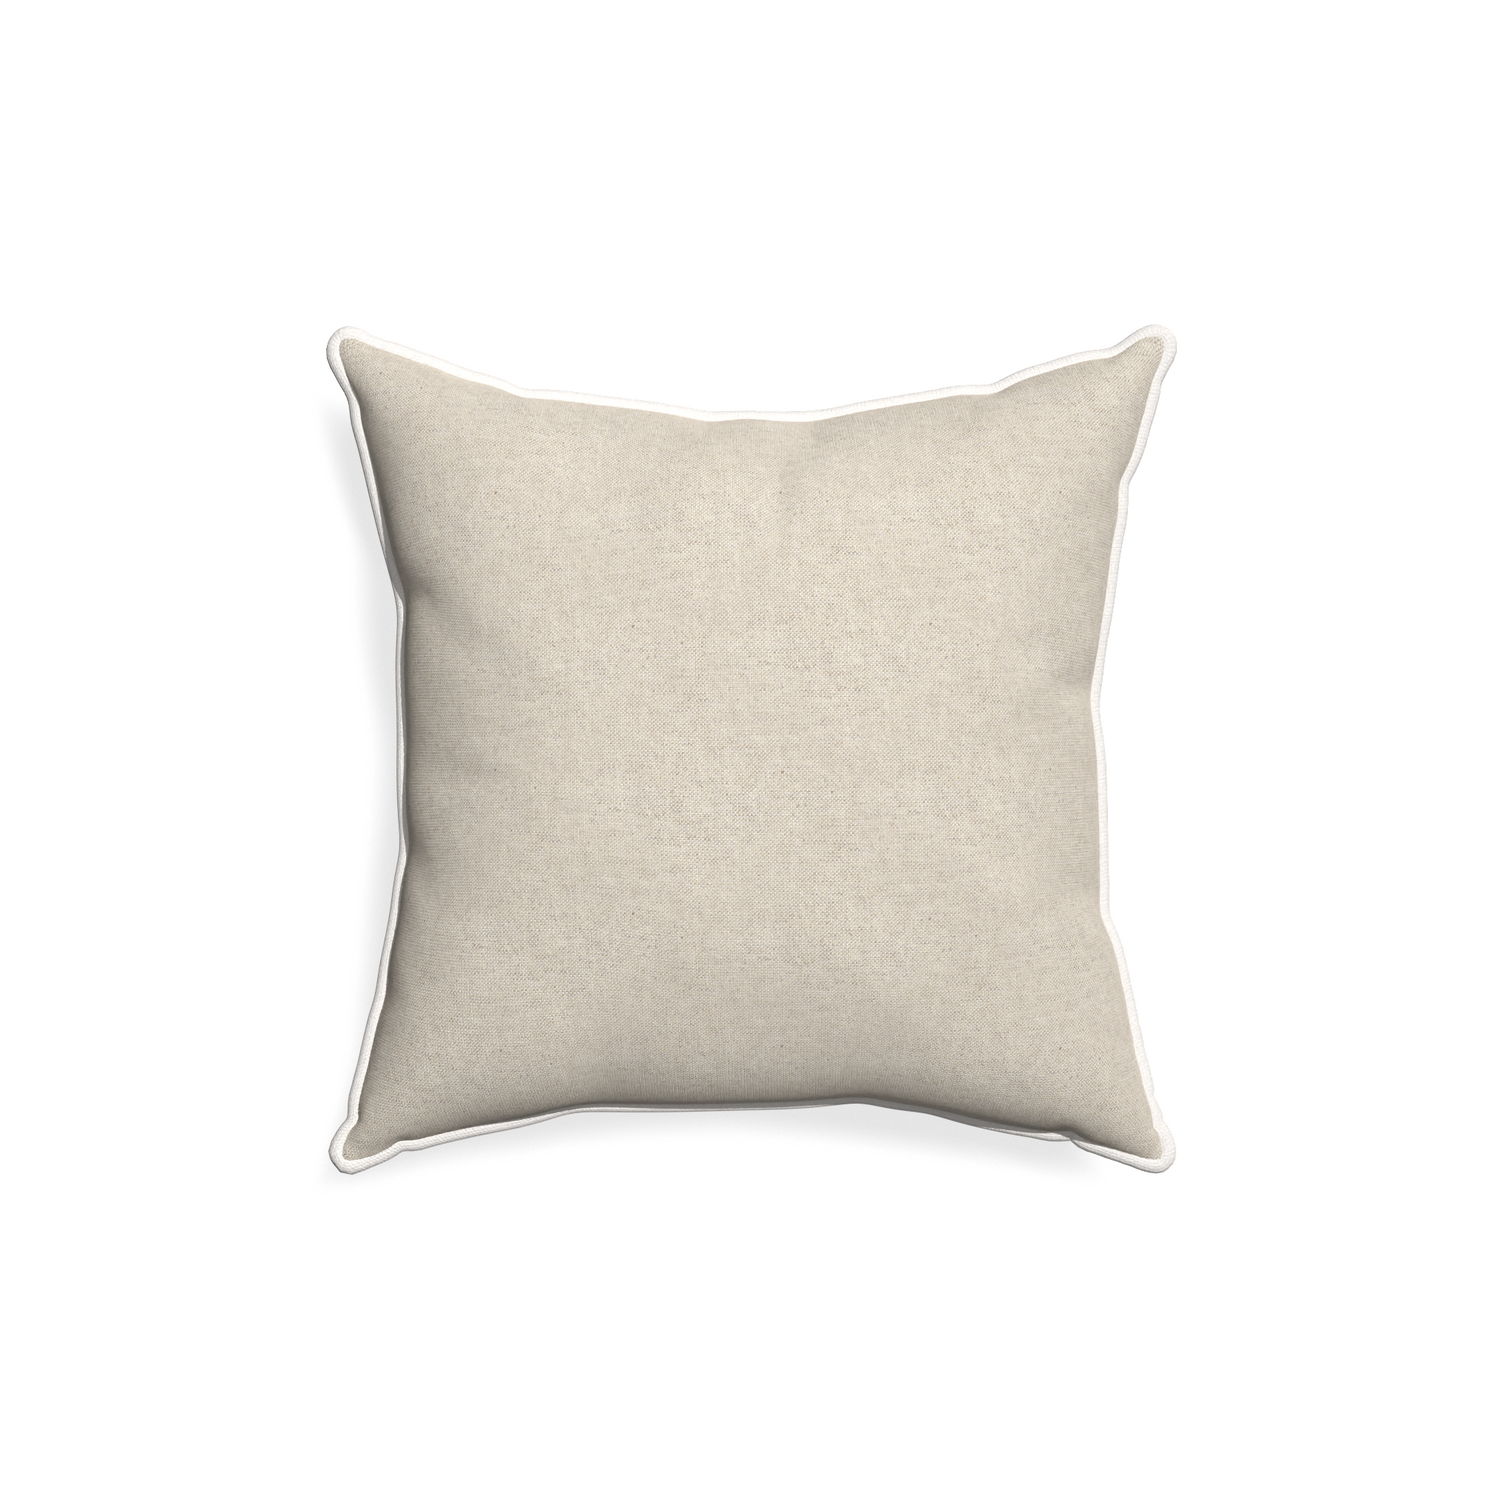 18-square oat custom pillow with snow piping on white background